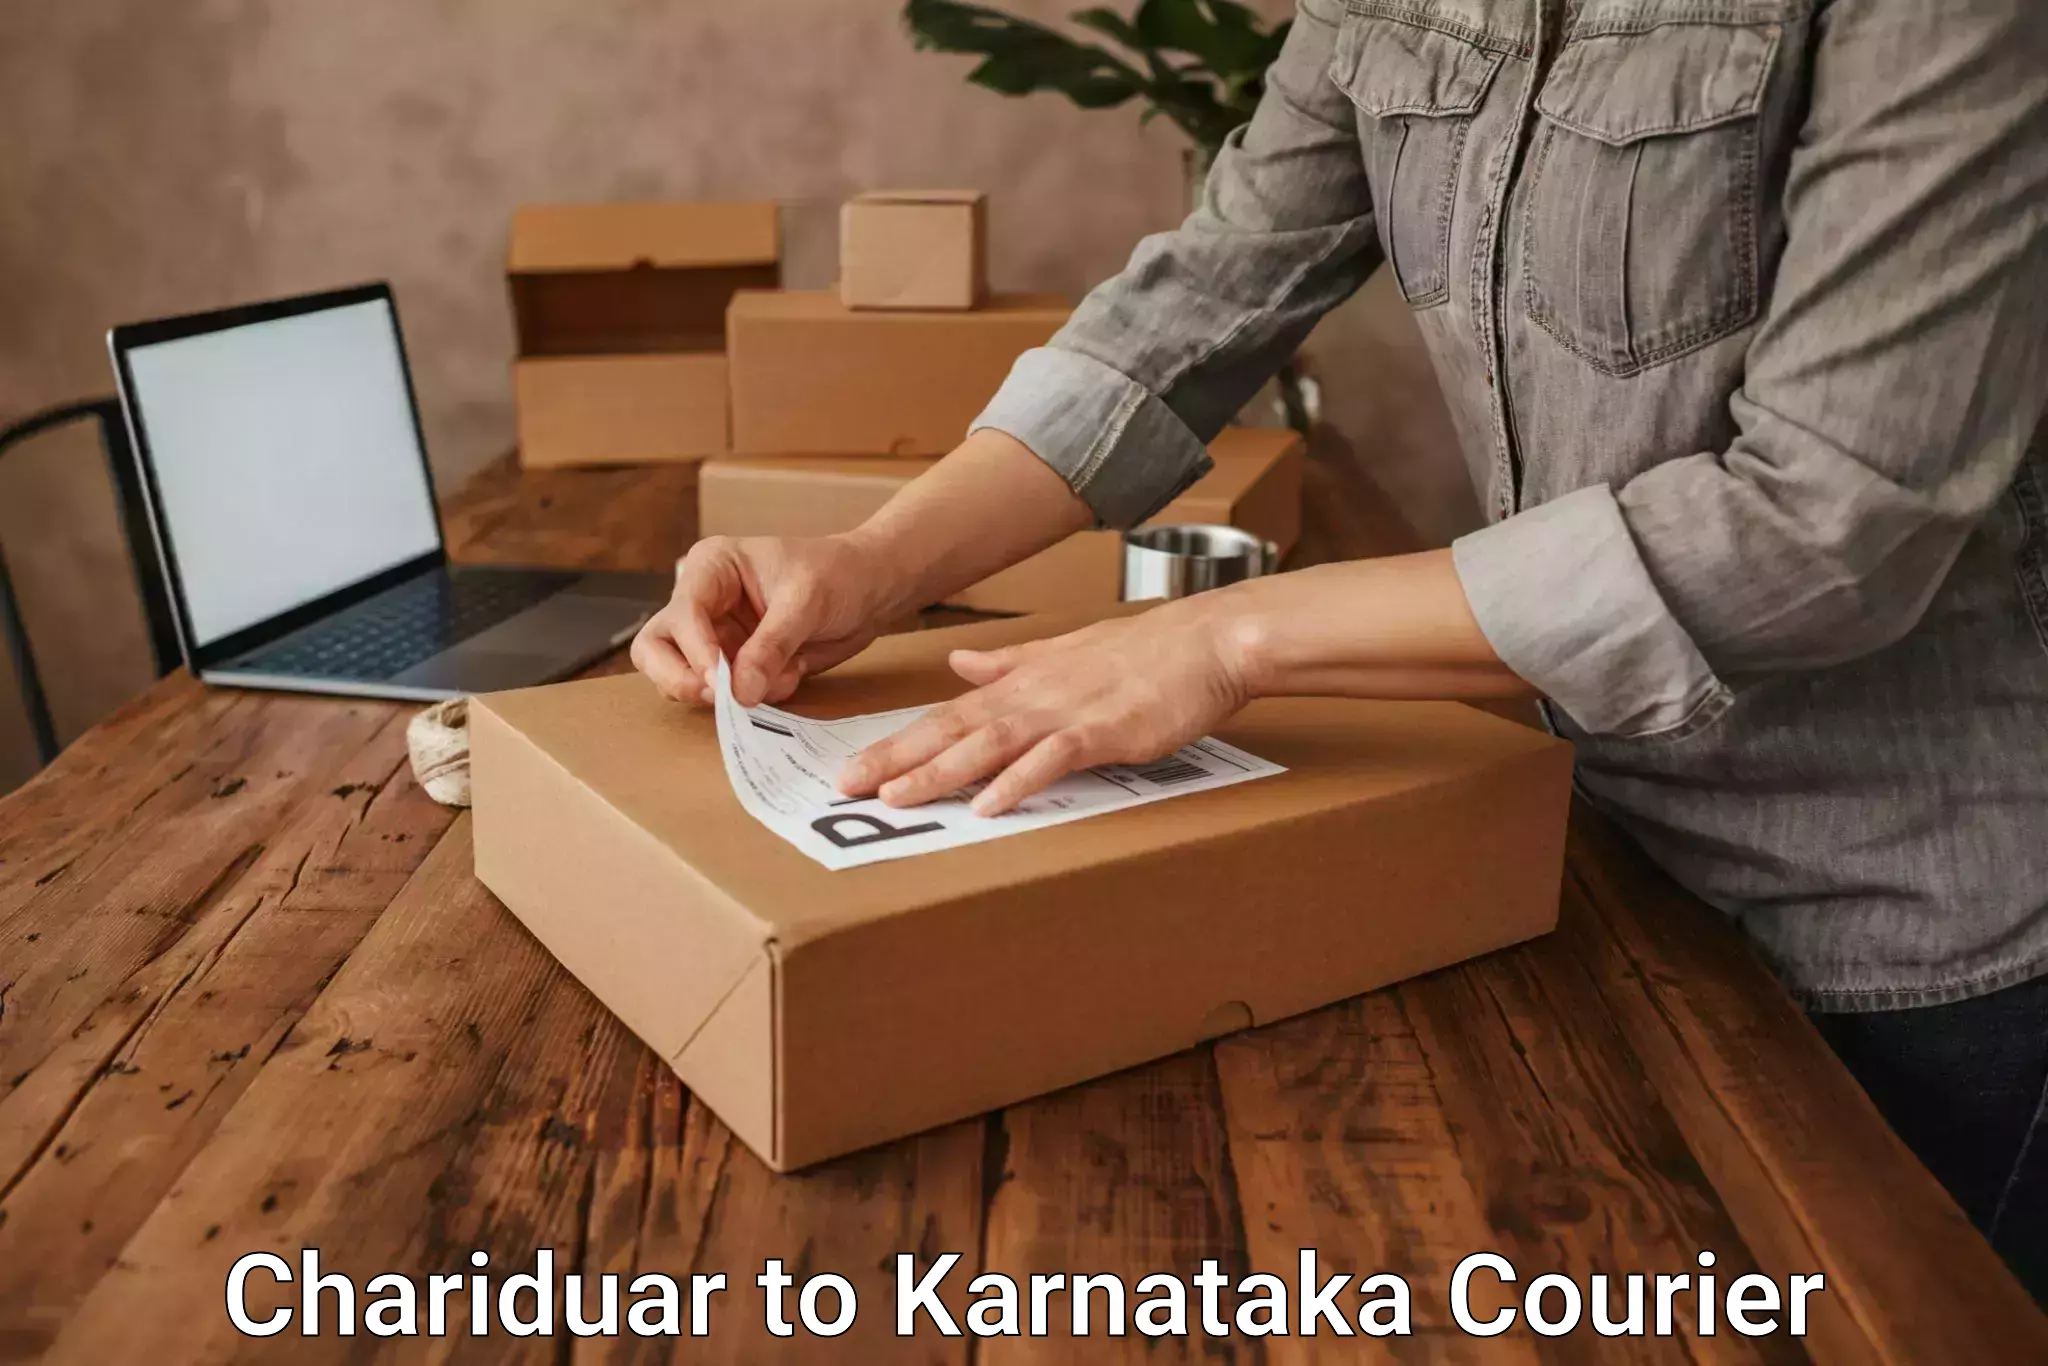 Courier service innovation in Chariduar to Bengaluru